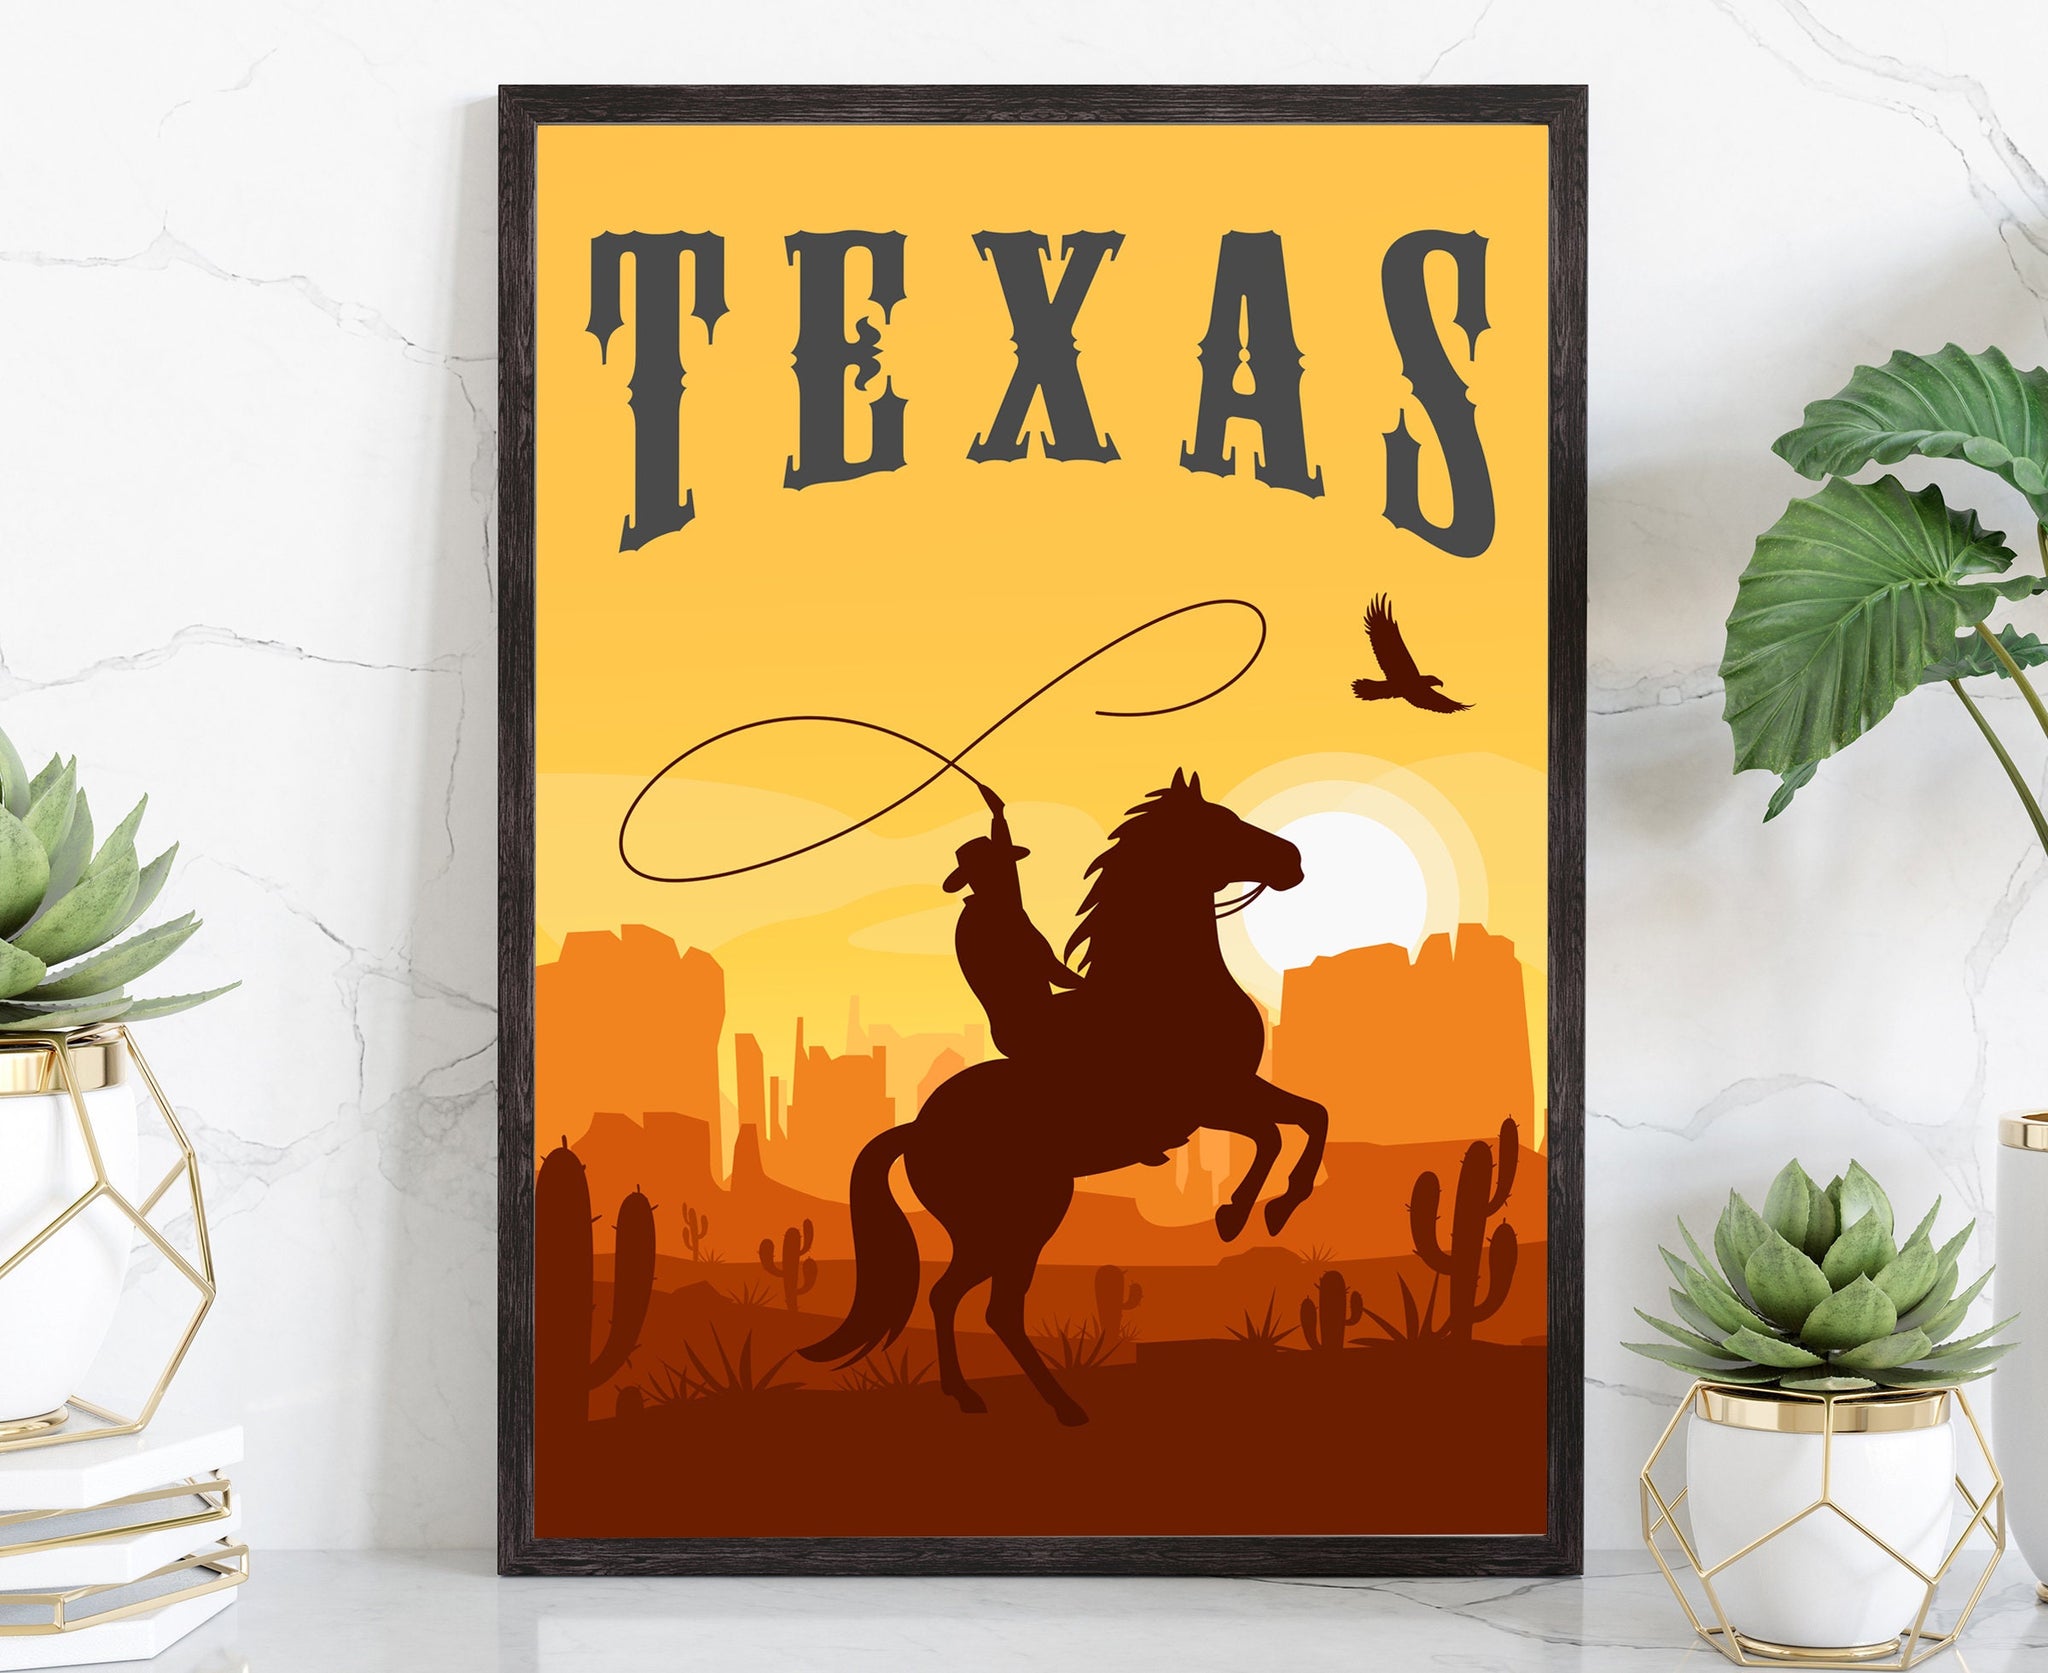 Texas Vintage Rustic Poster Print, Retro Style Travel Poster